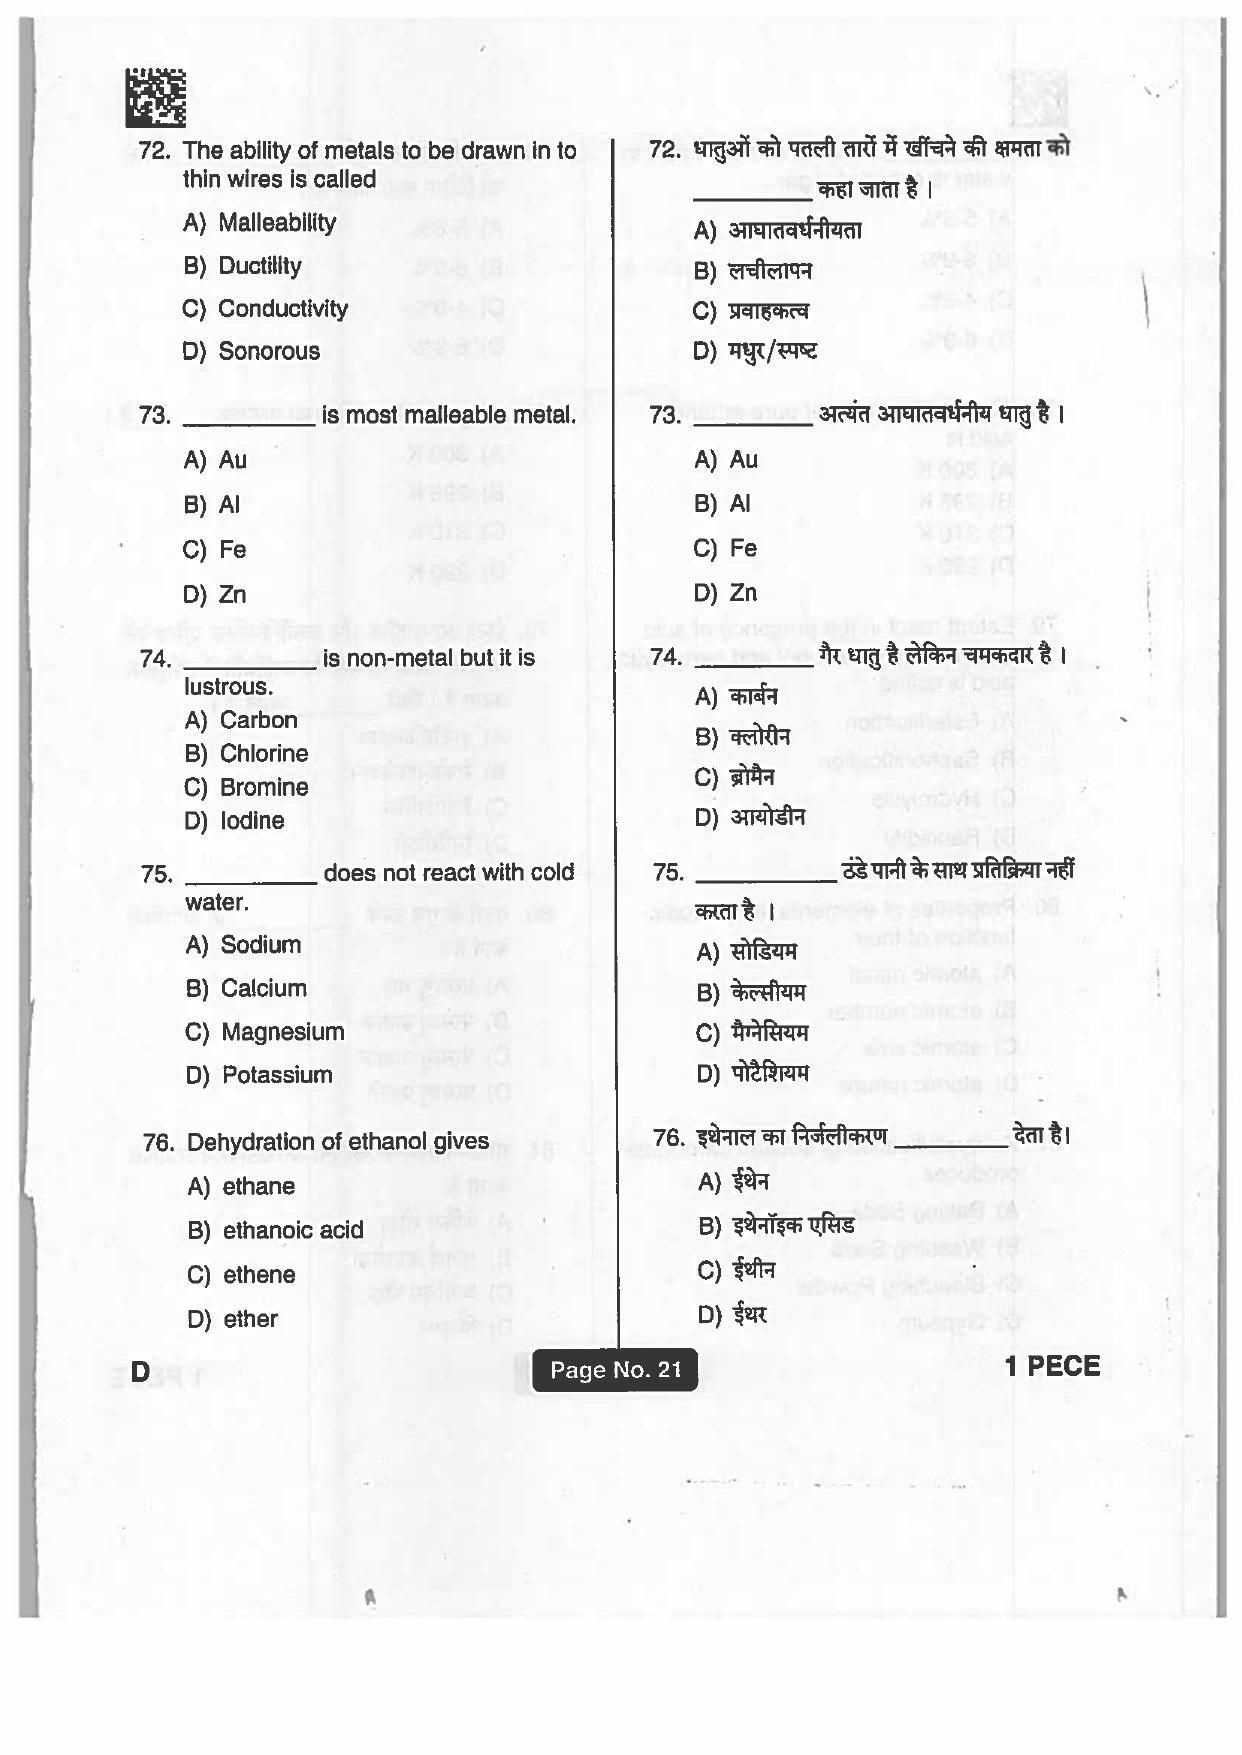 Jharkhand Polytechnic SET D 2019 Question Paper with Answers - Page 20